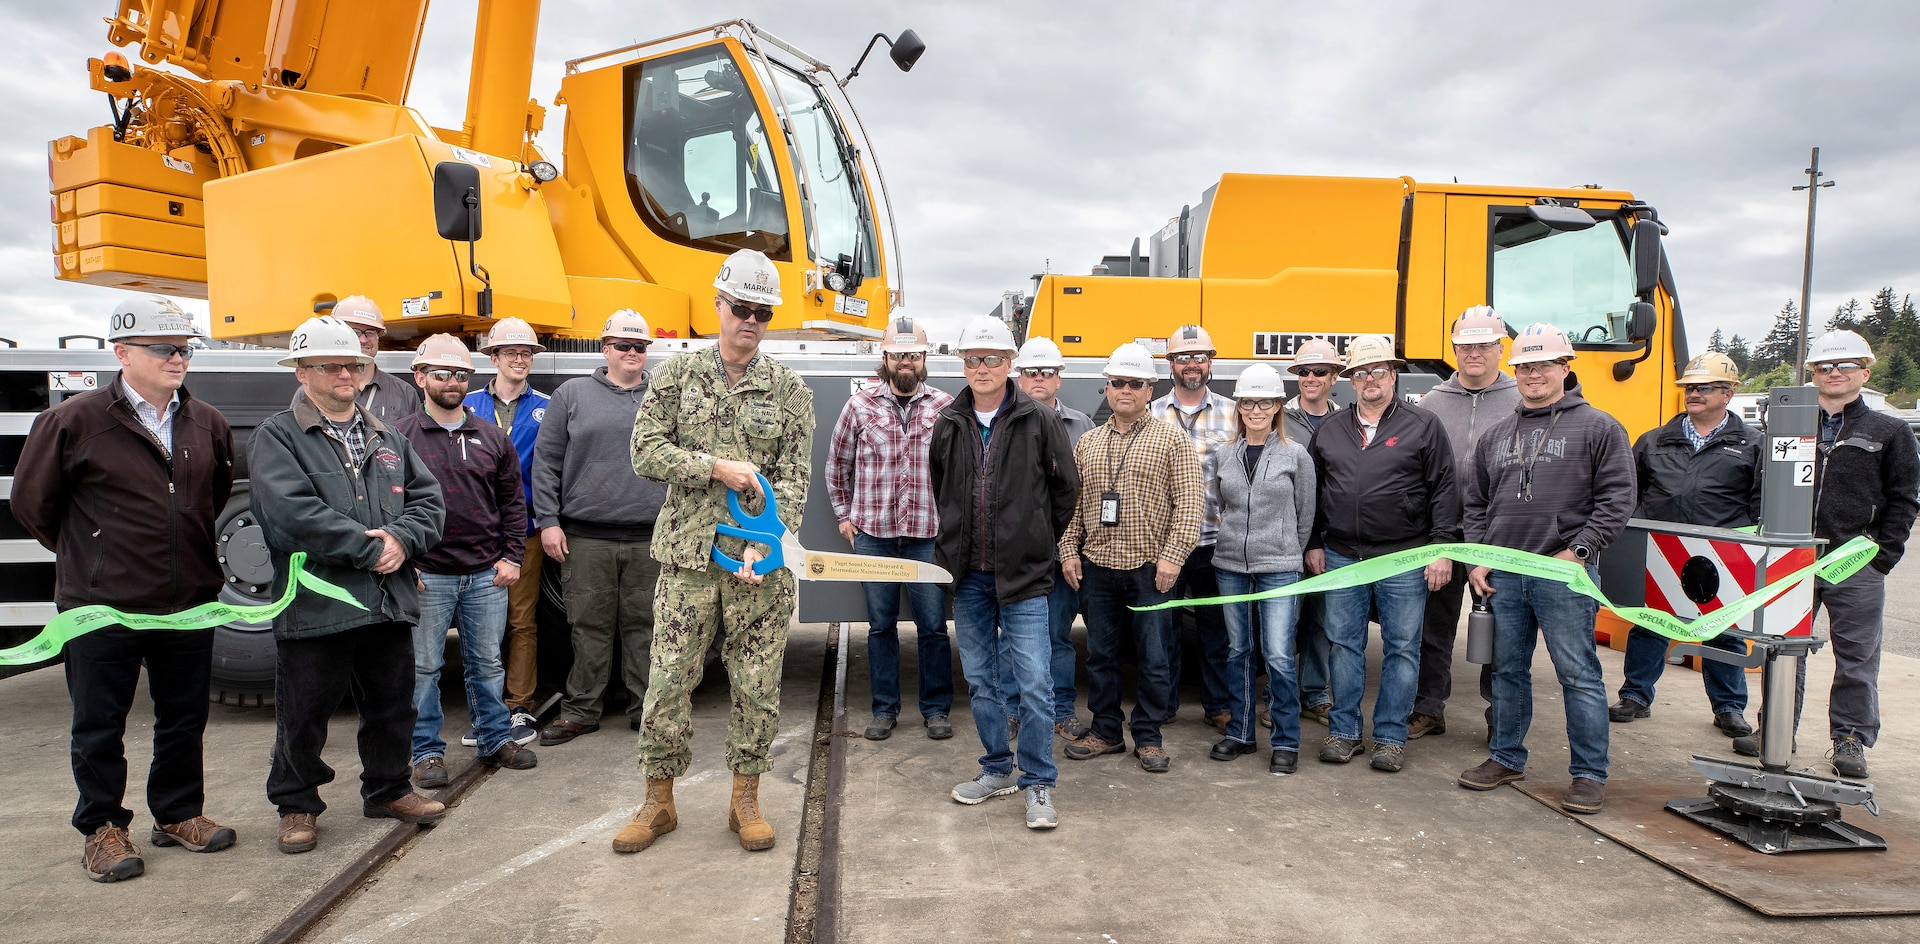 Lifting and Handling Department teammates watch as Capt. Howard Markle, Puget Sound Naval Shipyard & Intermediate Maintenance Facility commander, cuts the ribbon to ceremoniously bring into service the first of four mobile cranes purchased through Naval Sea Systems Command’s Capital Investment Program.